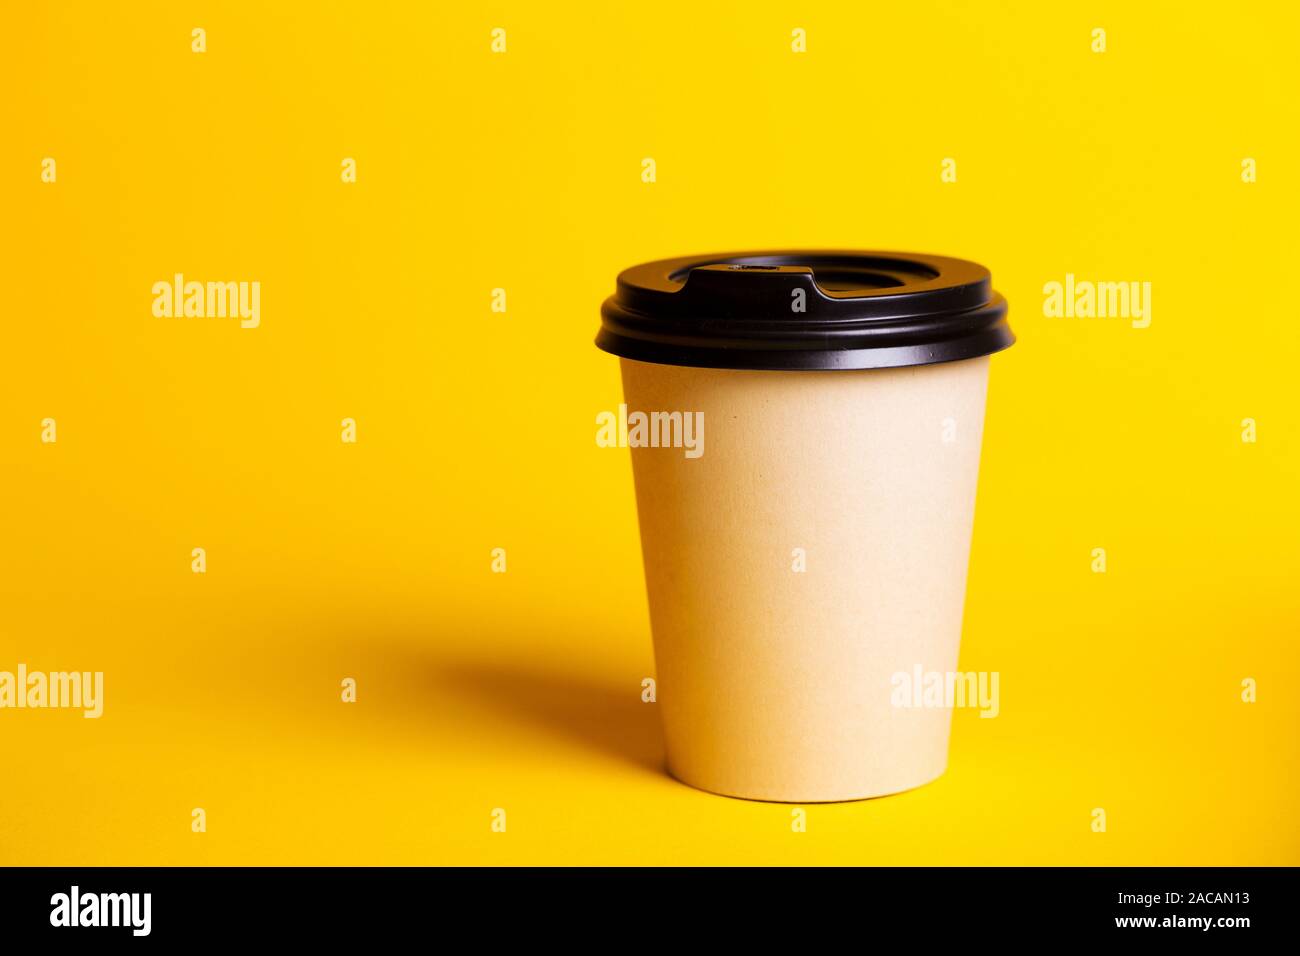 Download Coffee To Go Paper Cup With Coffee On A Yellow Background Stock Photo Alamy PSD Mockup Templates